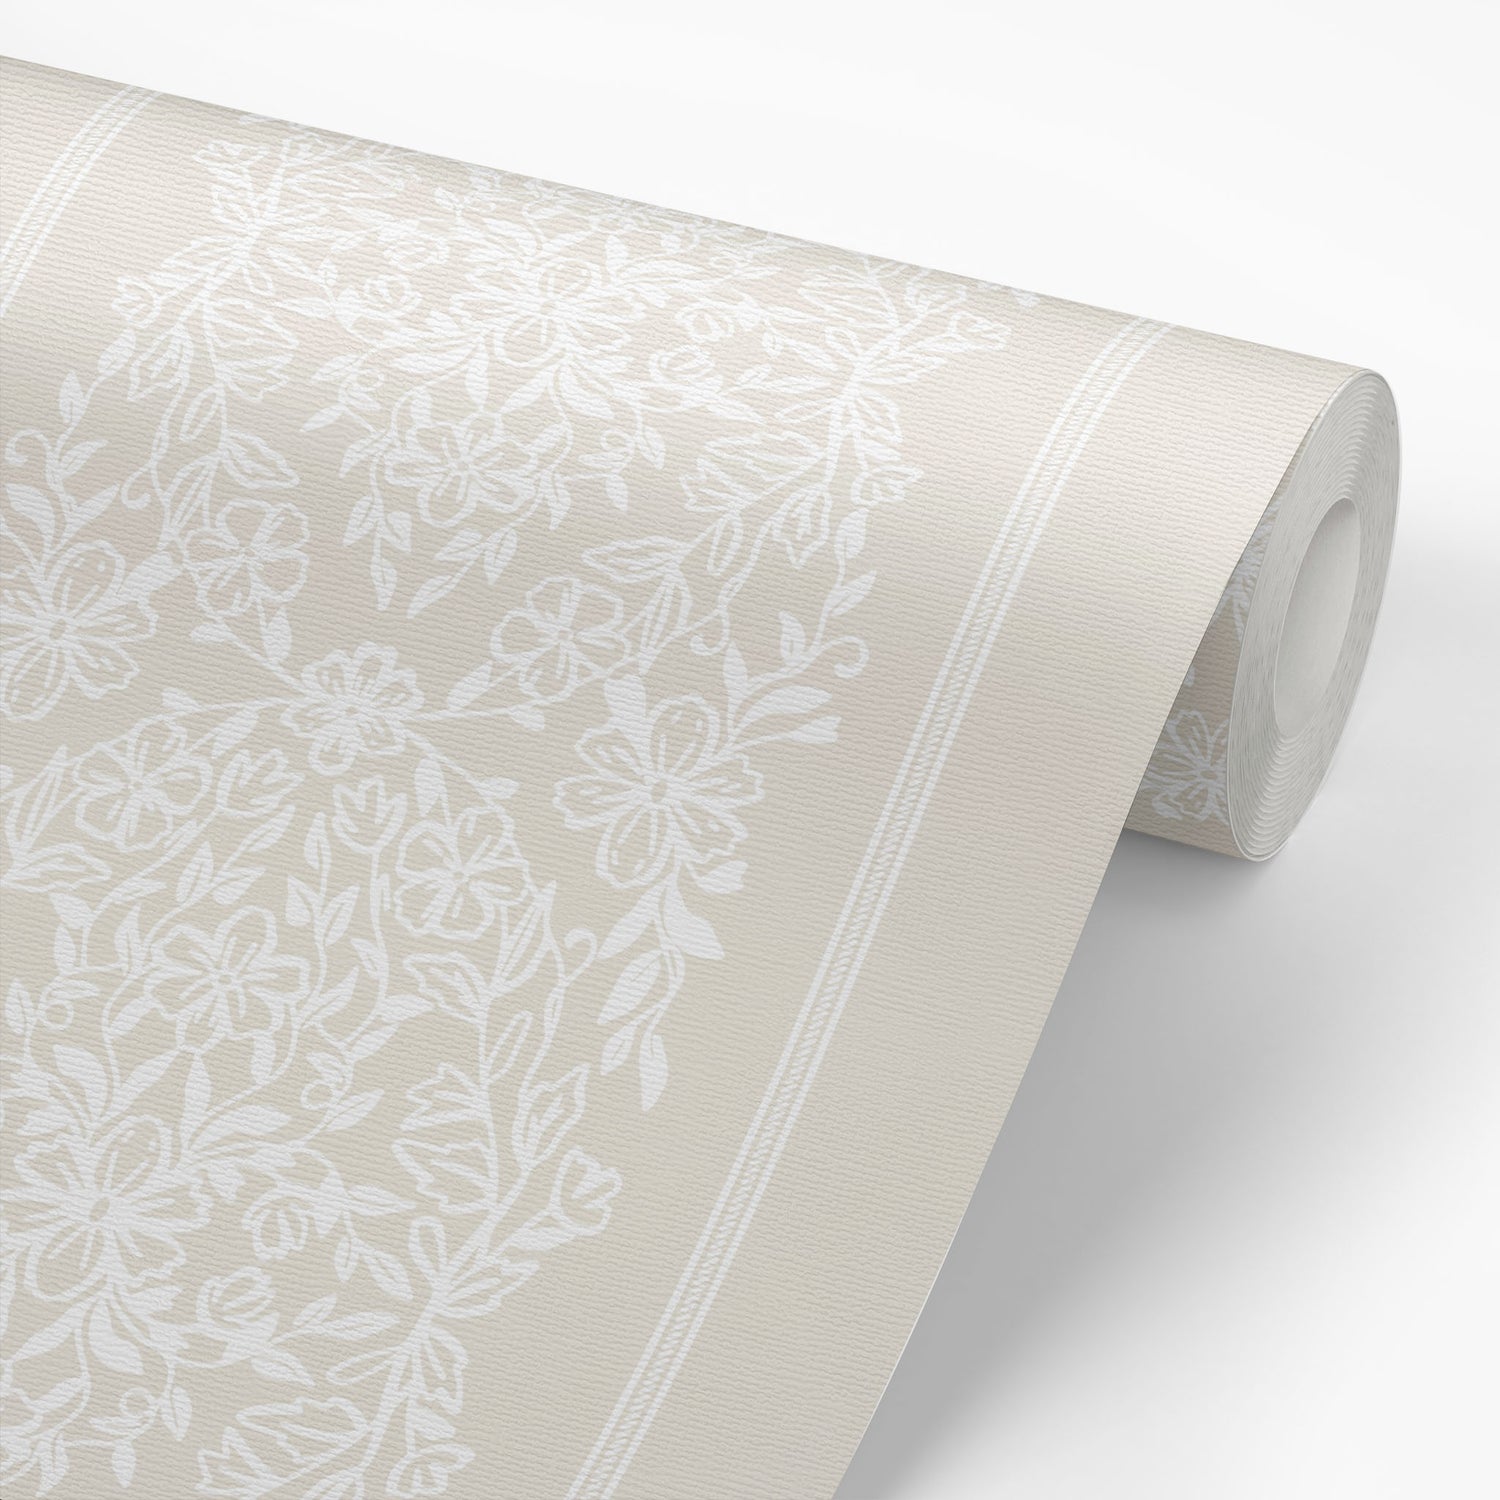 The classic and elevated design, adorned in a timeless taupe hue wallpaper shown on a wallpaper roll.